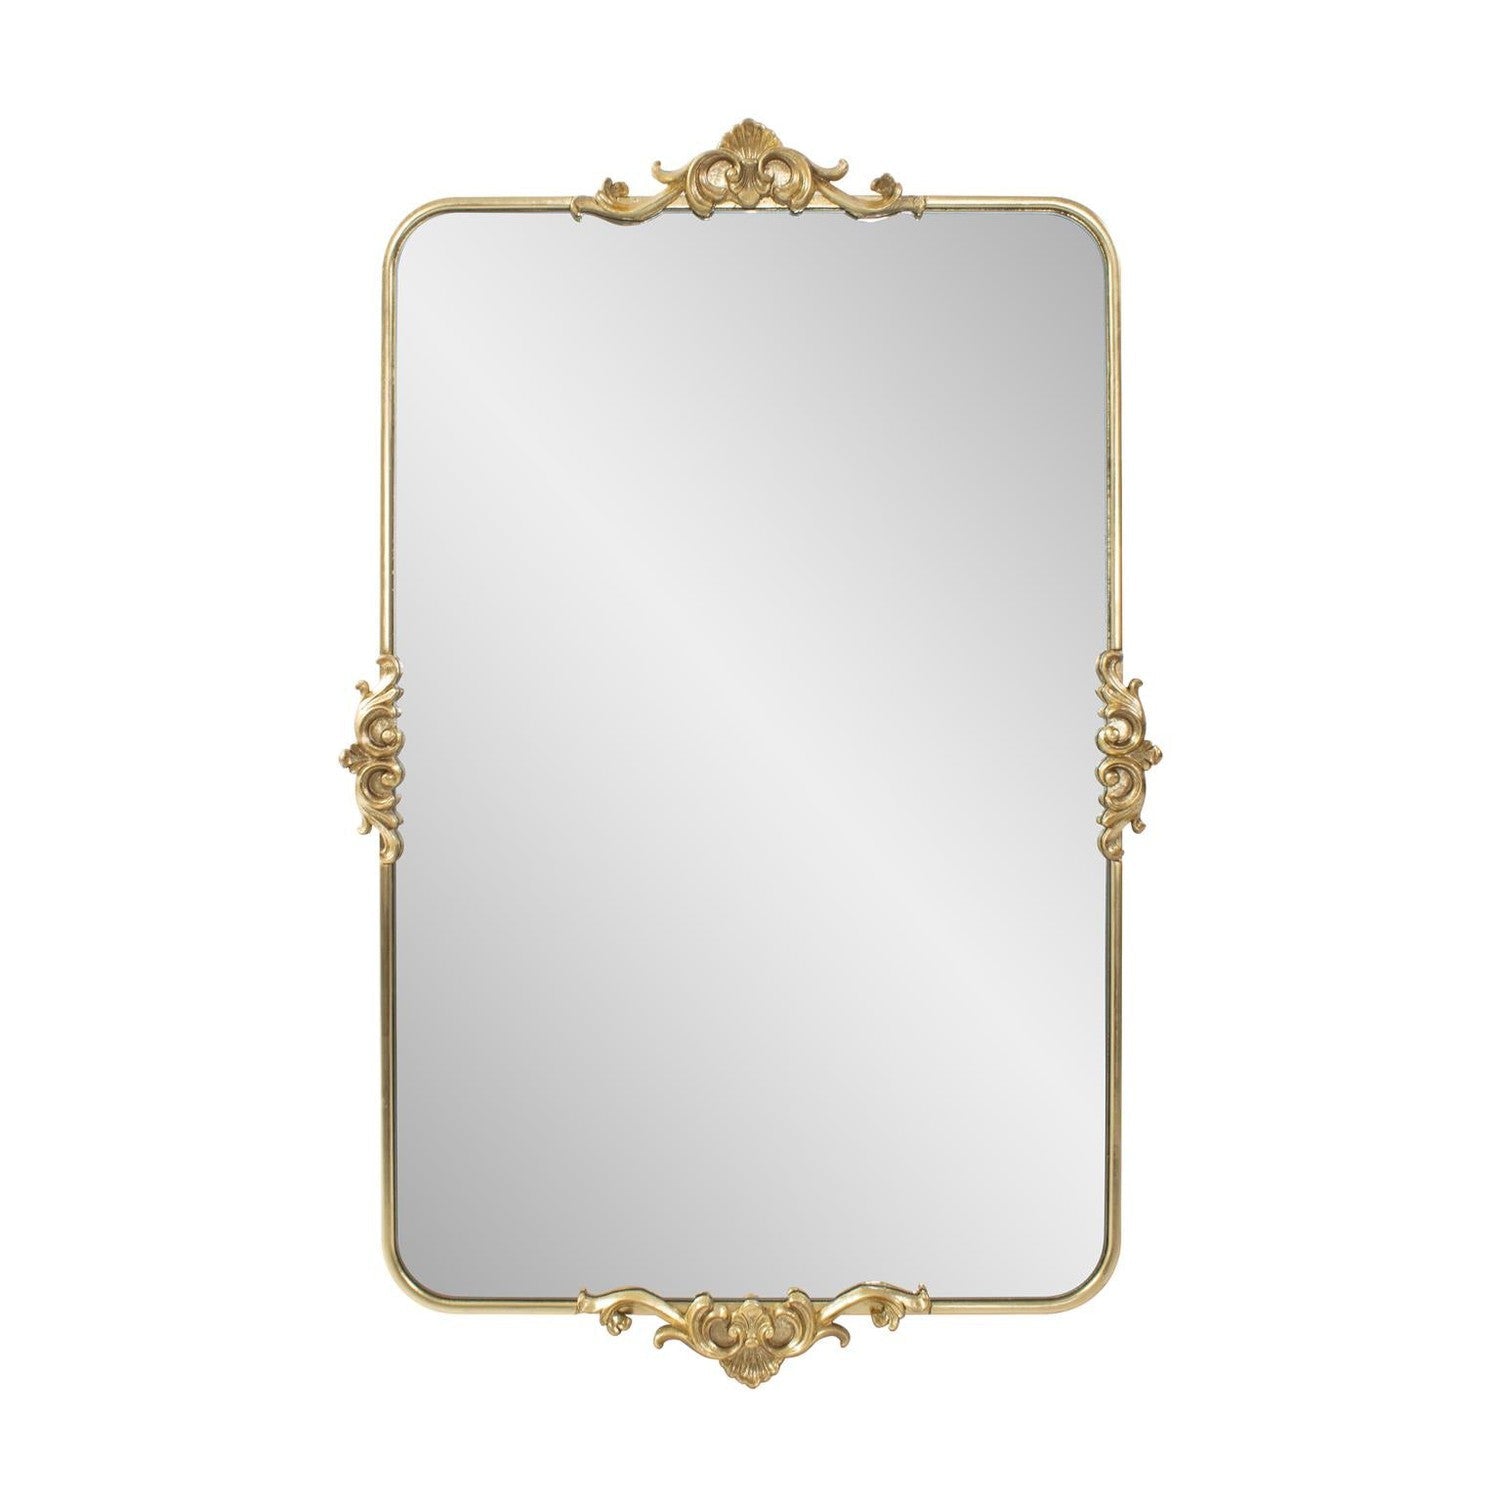 The Wanstead Park Gold Gilded Vanity Mirror-The Howard Elliott Collection-HOWARD-66073-Mirrors-1-France and Son